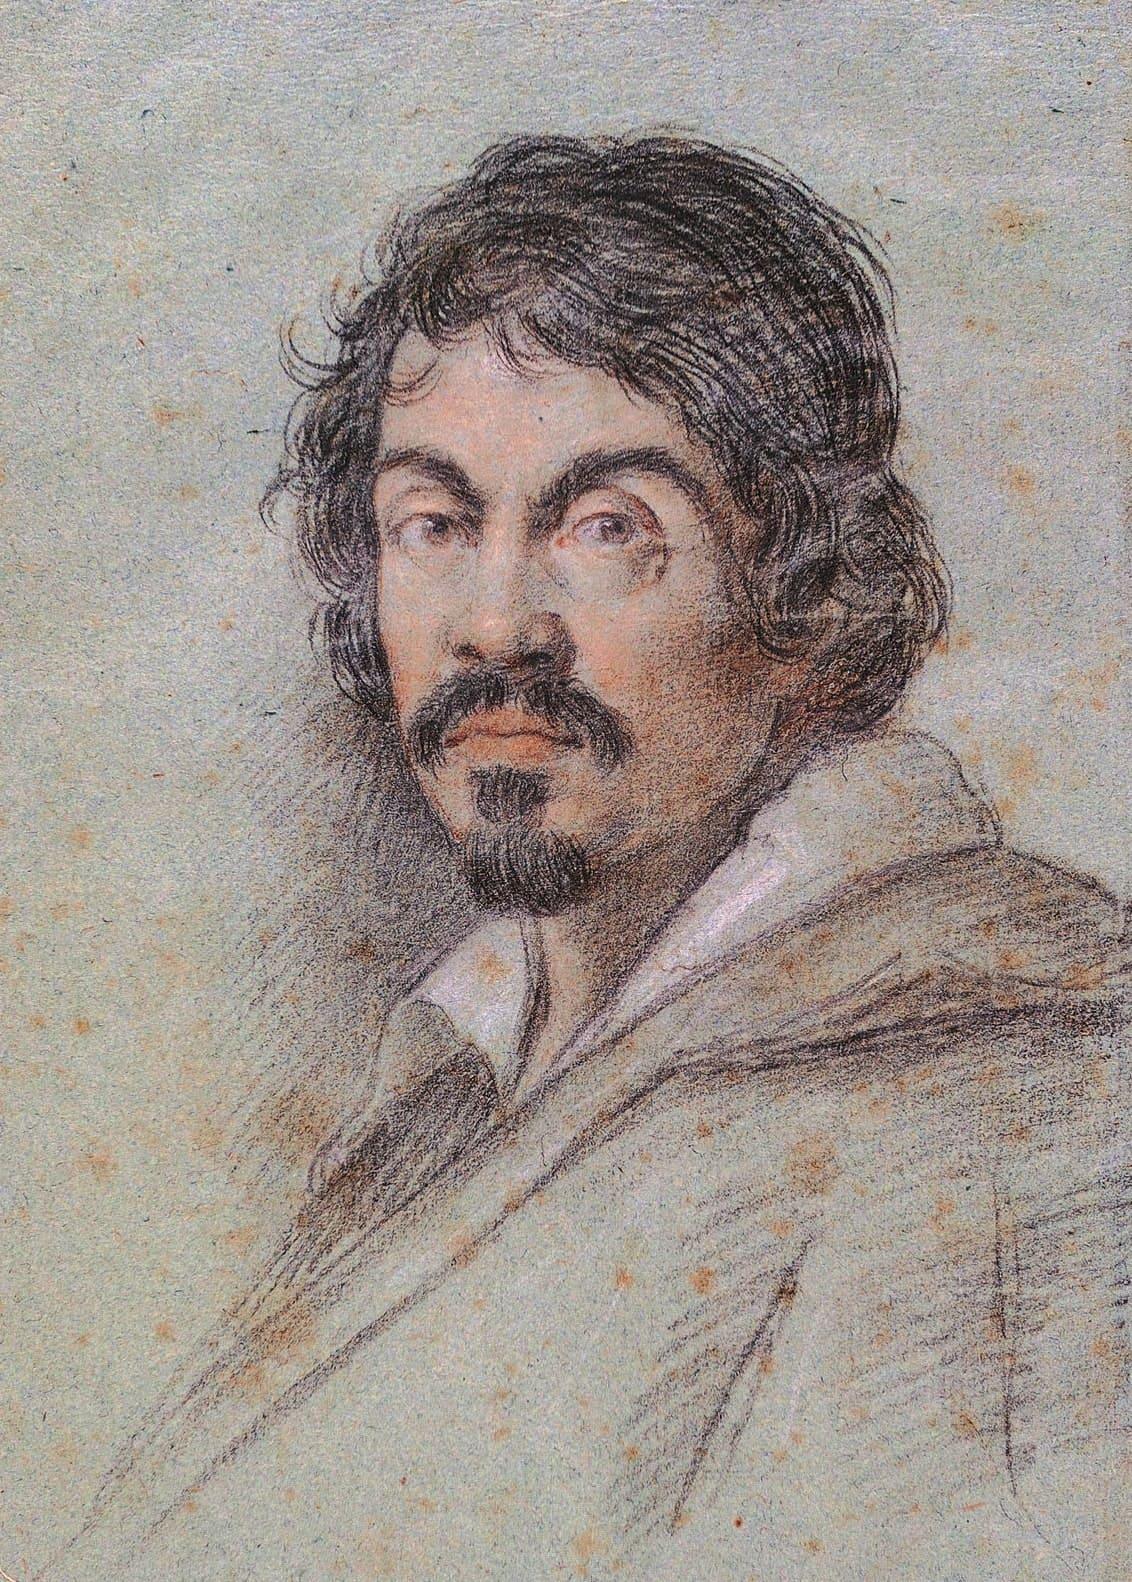 Caravaggio: His Life and 8 Most Famous Works